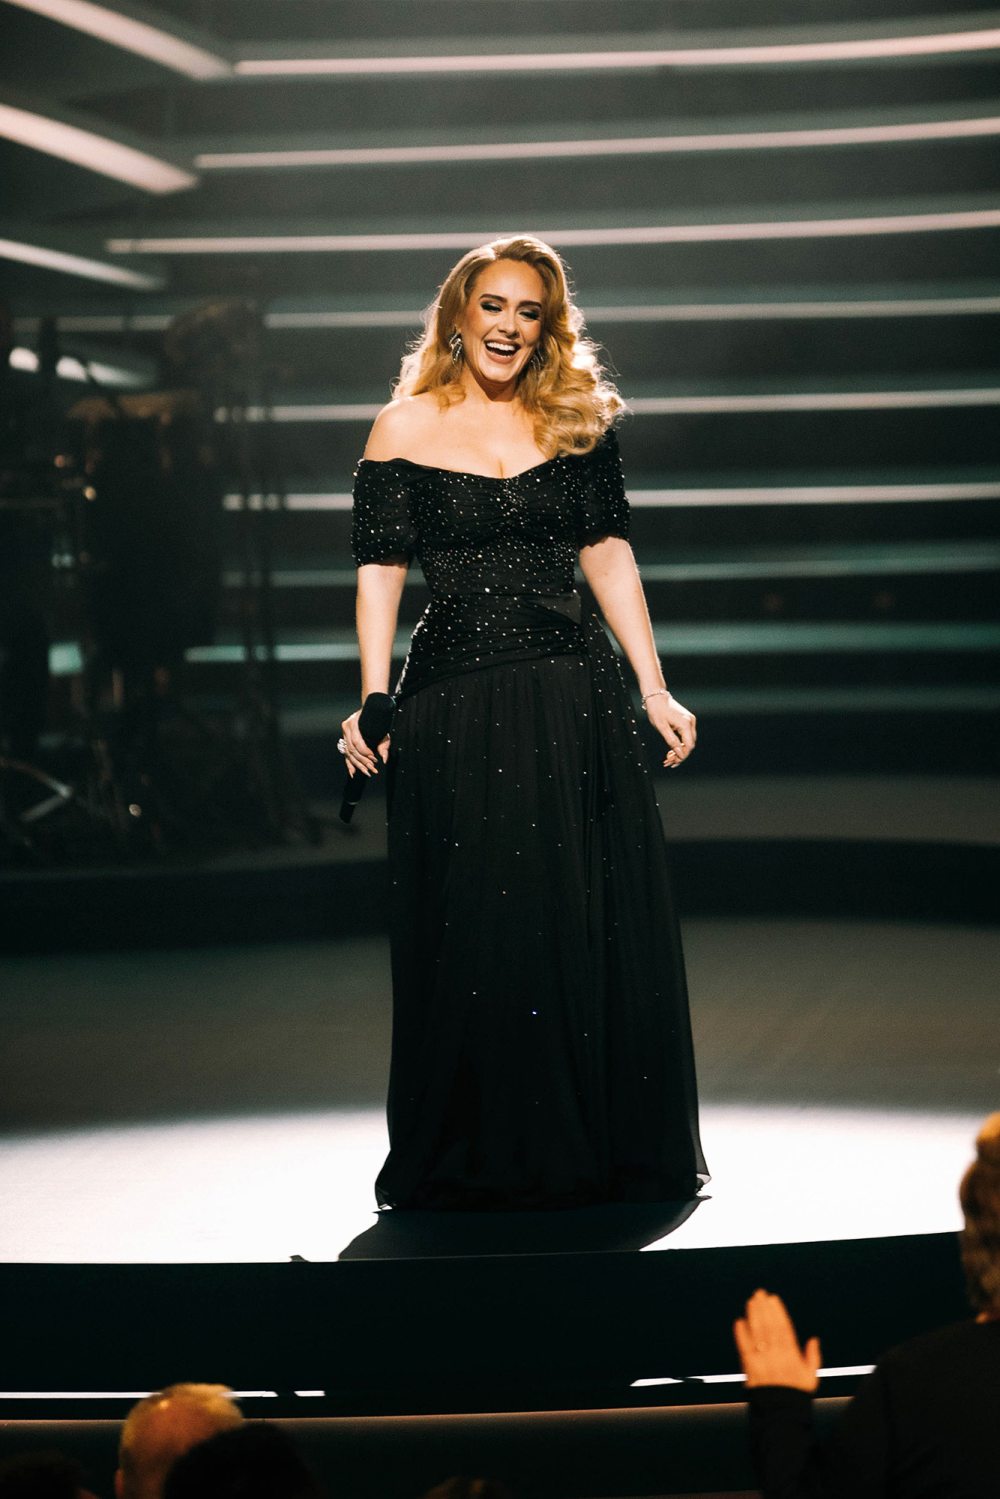 Sing It Adele Announces 2nd TV Concert Special After Postponing Vegas Shows